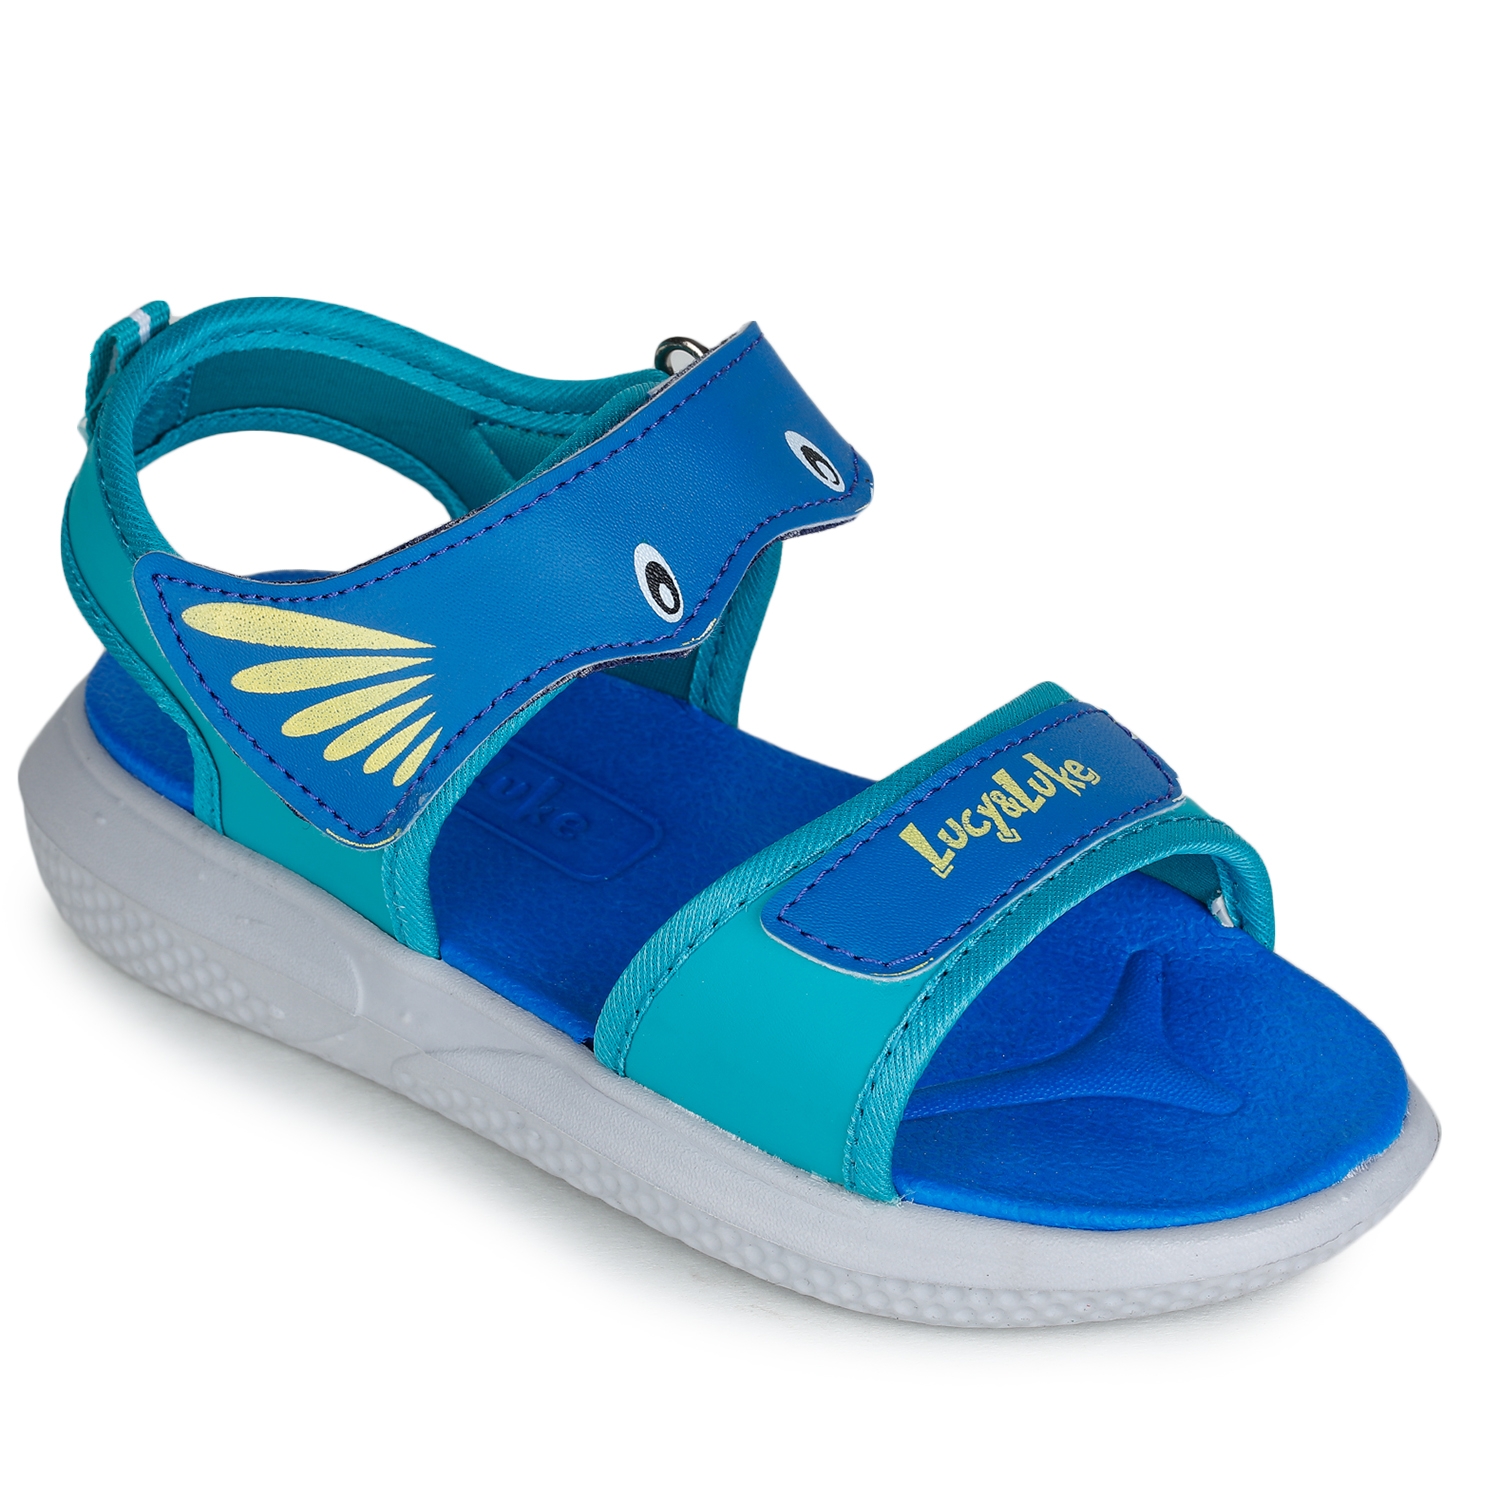 Lucy & Luke by Liberty HIPPO-1 Blue Sandals for Kids